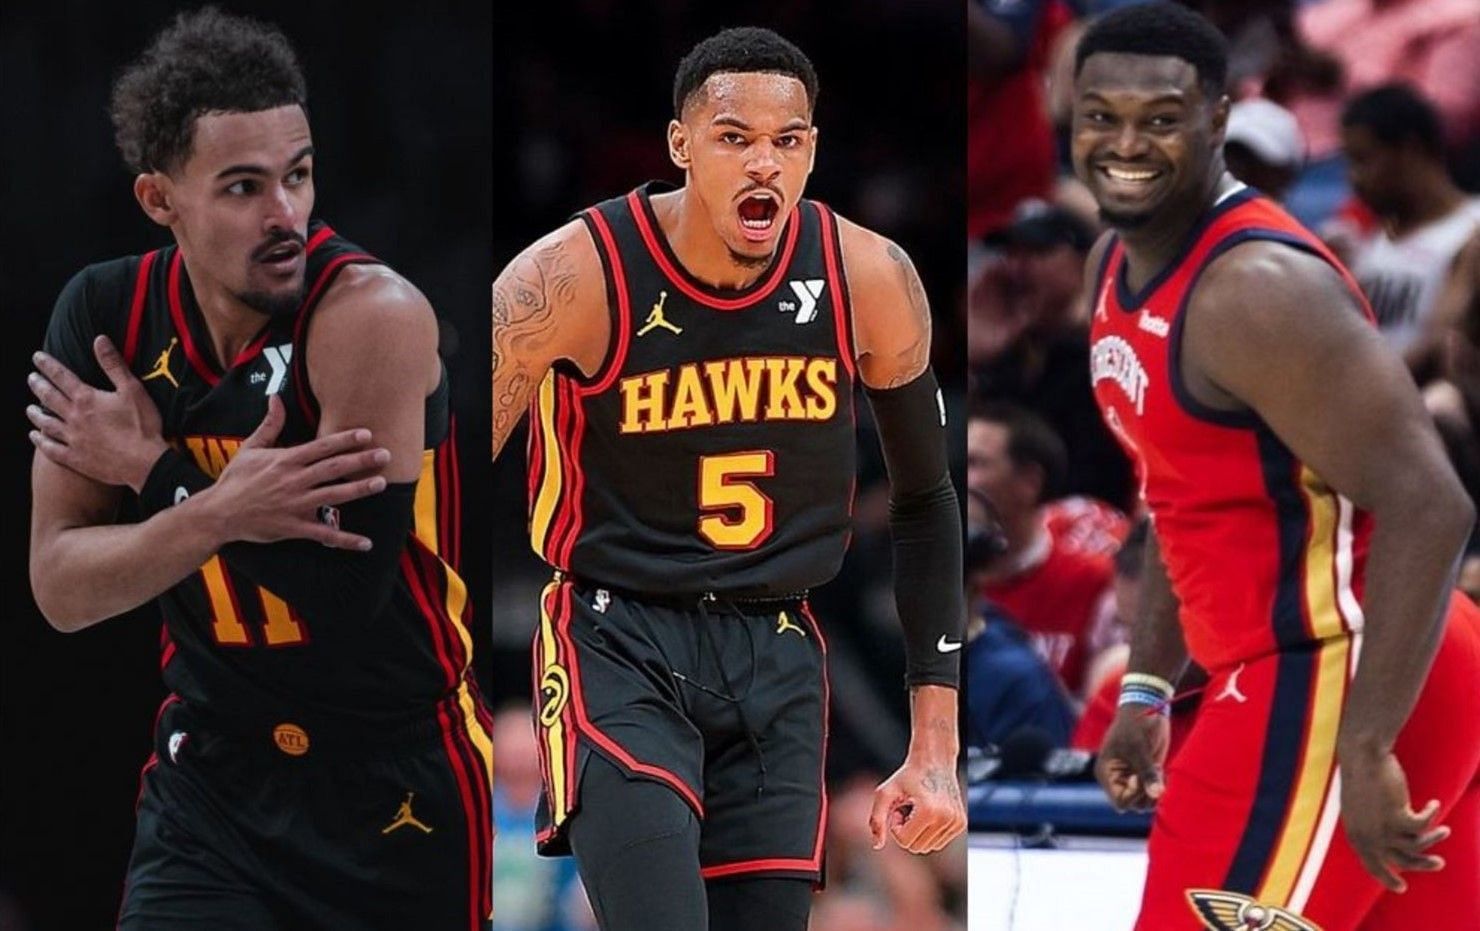 Report says New Orleans Pelicans looking at pairing Trae Young or Dejounte Murray up with All-Star Zion Williamson. (Photos from X pages of Atlanta Hawks and New Orleans Pelicans)